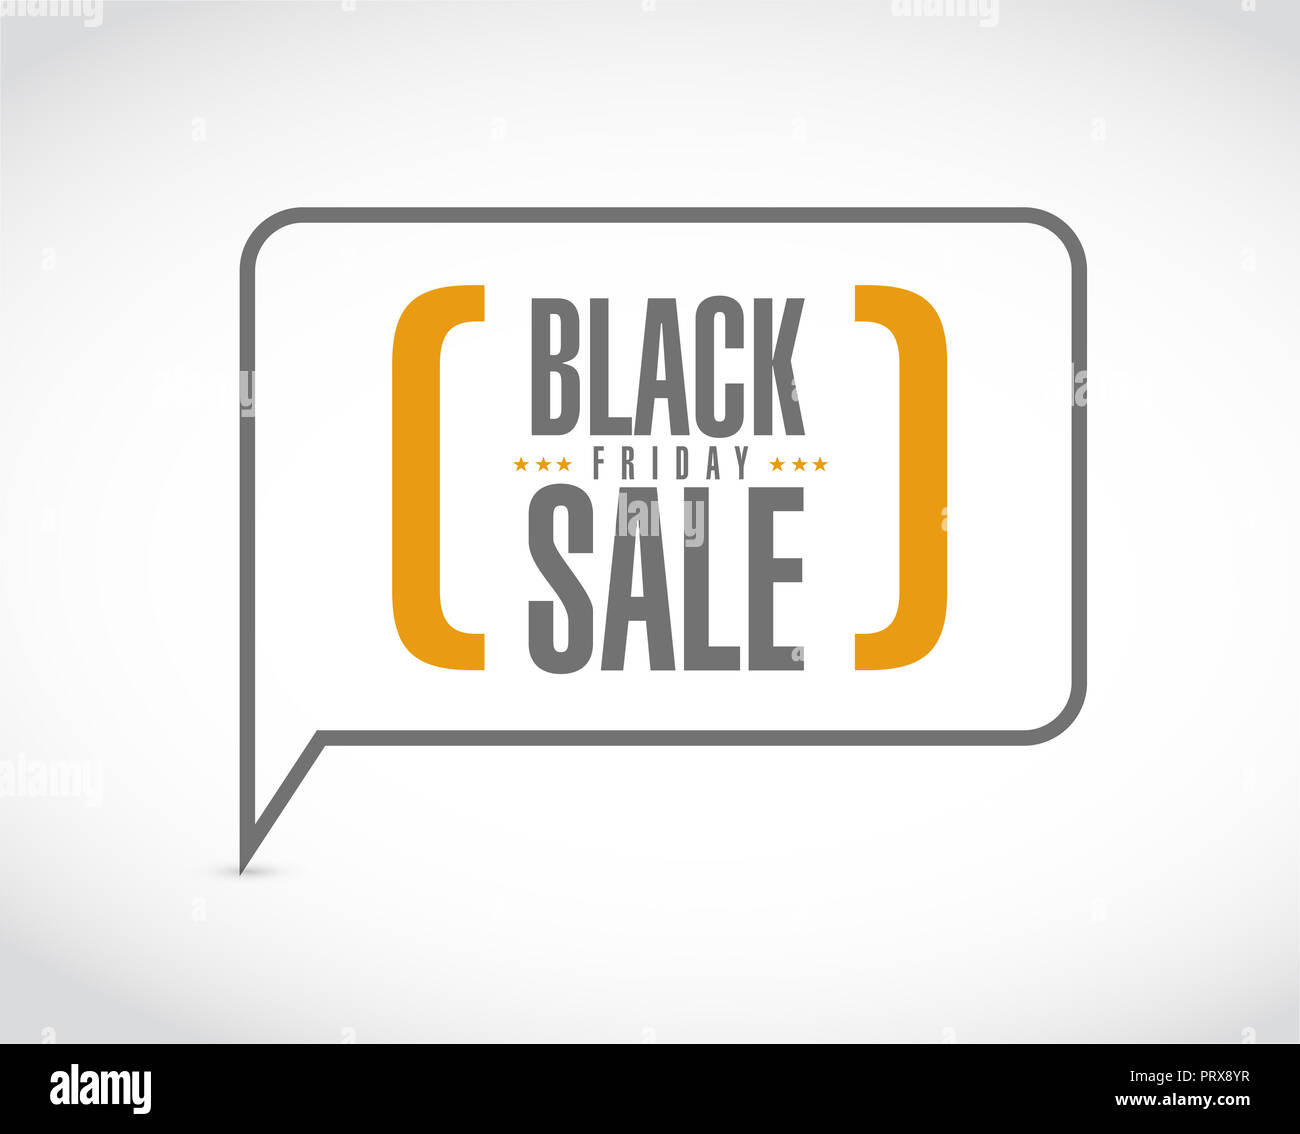 Black Friday sale message bubble isolated over a white background Stock Photo